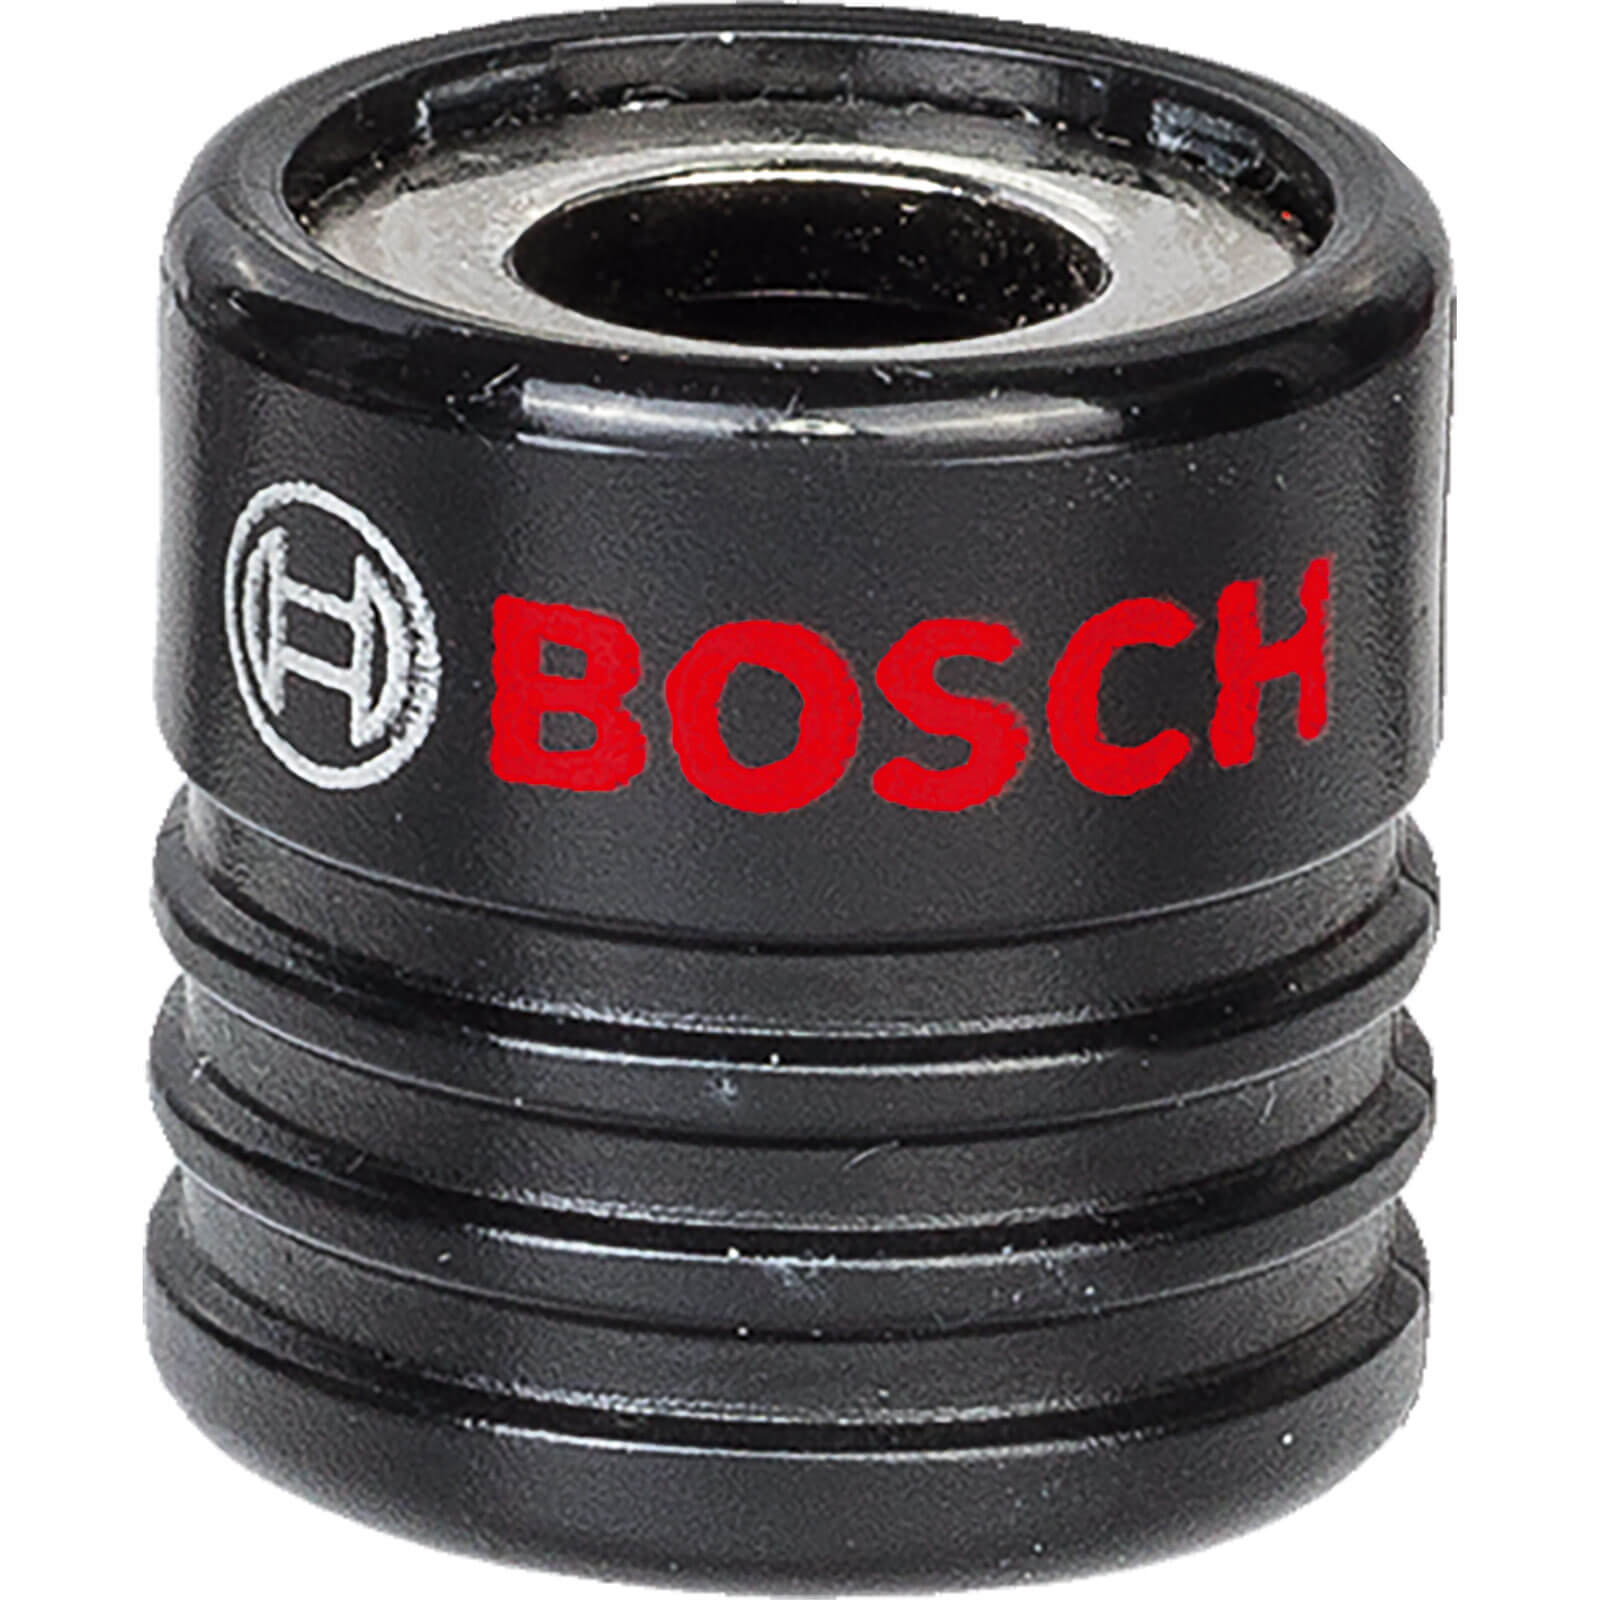 Image of Bosch Impact Control Magnetic Sleeve for Screwdriver Bits